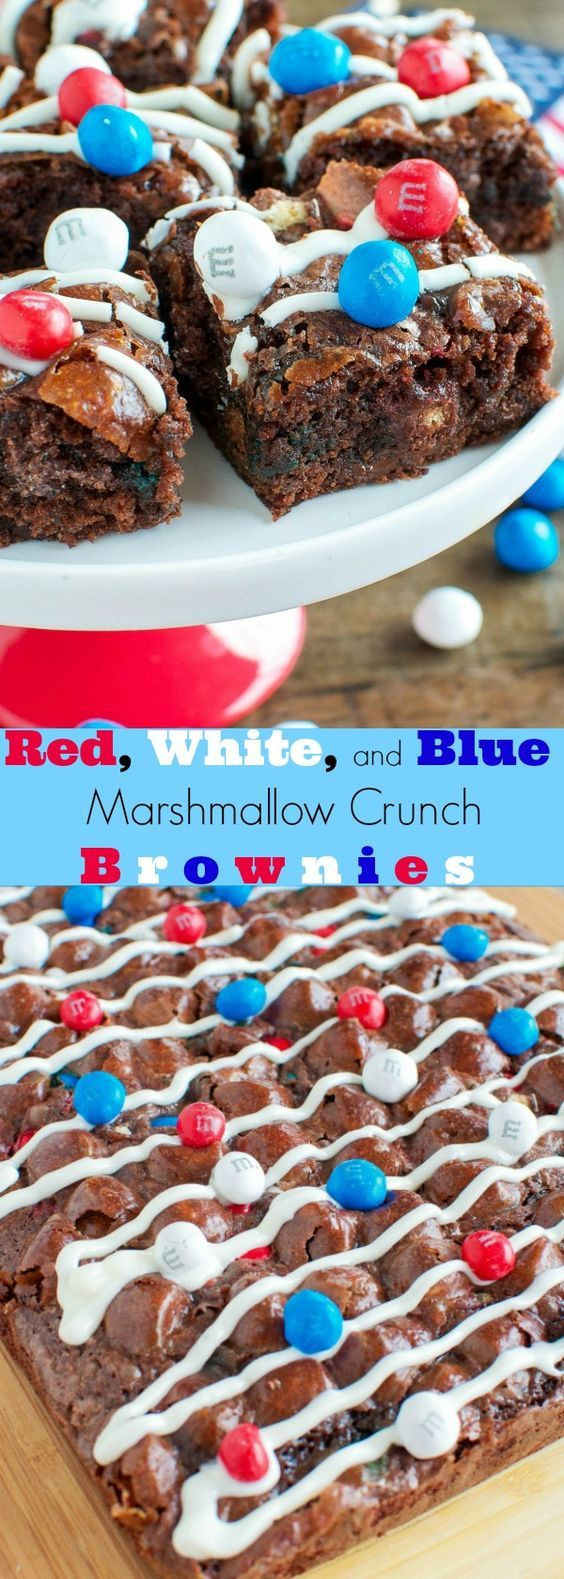 Memorial Day Dessert
 Red White and Blue Dessert Idea for Memorial Day Try